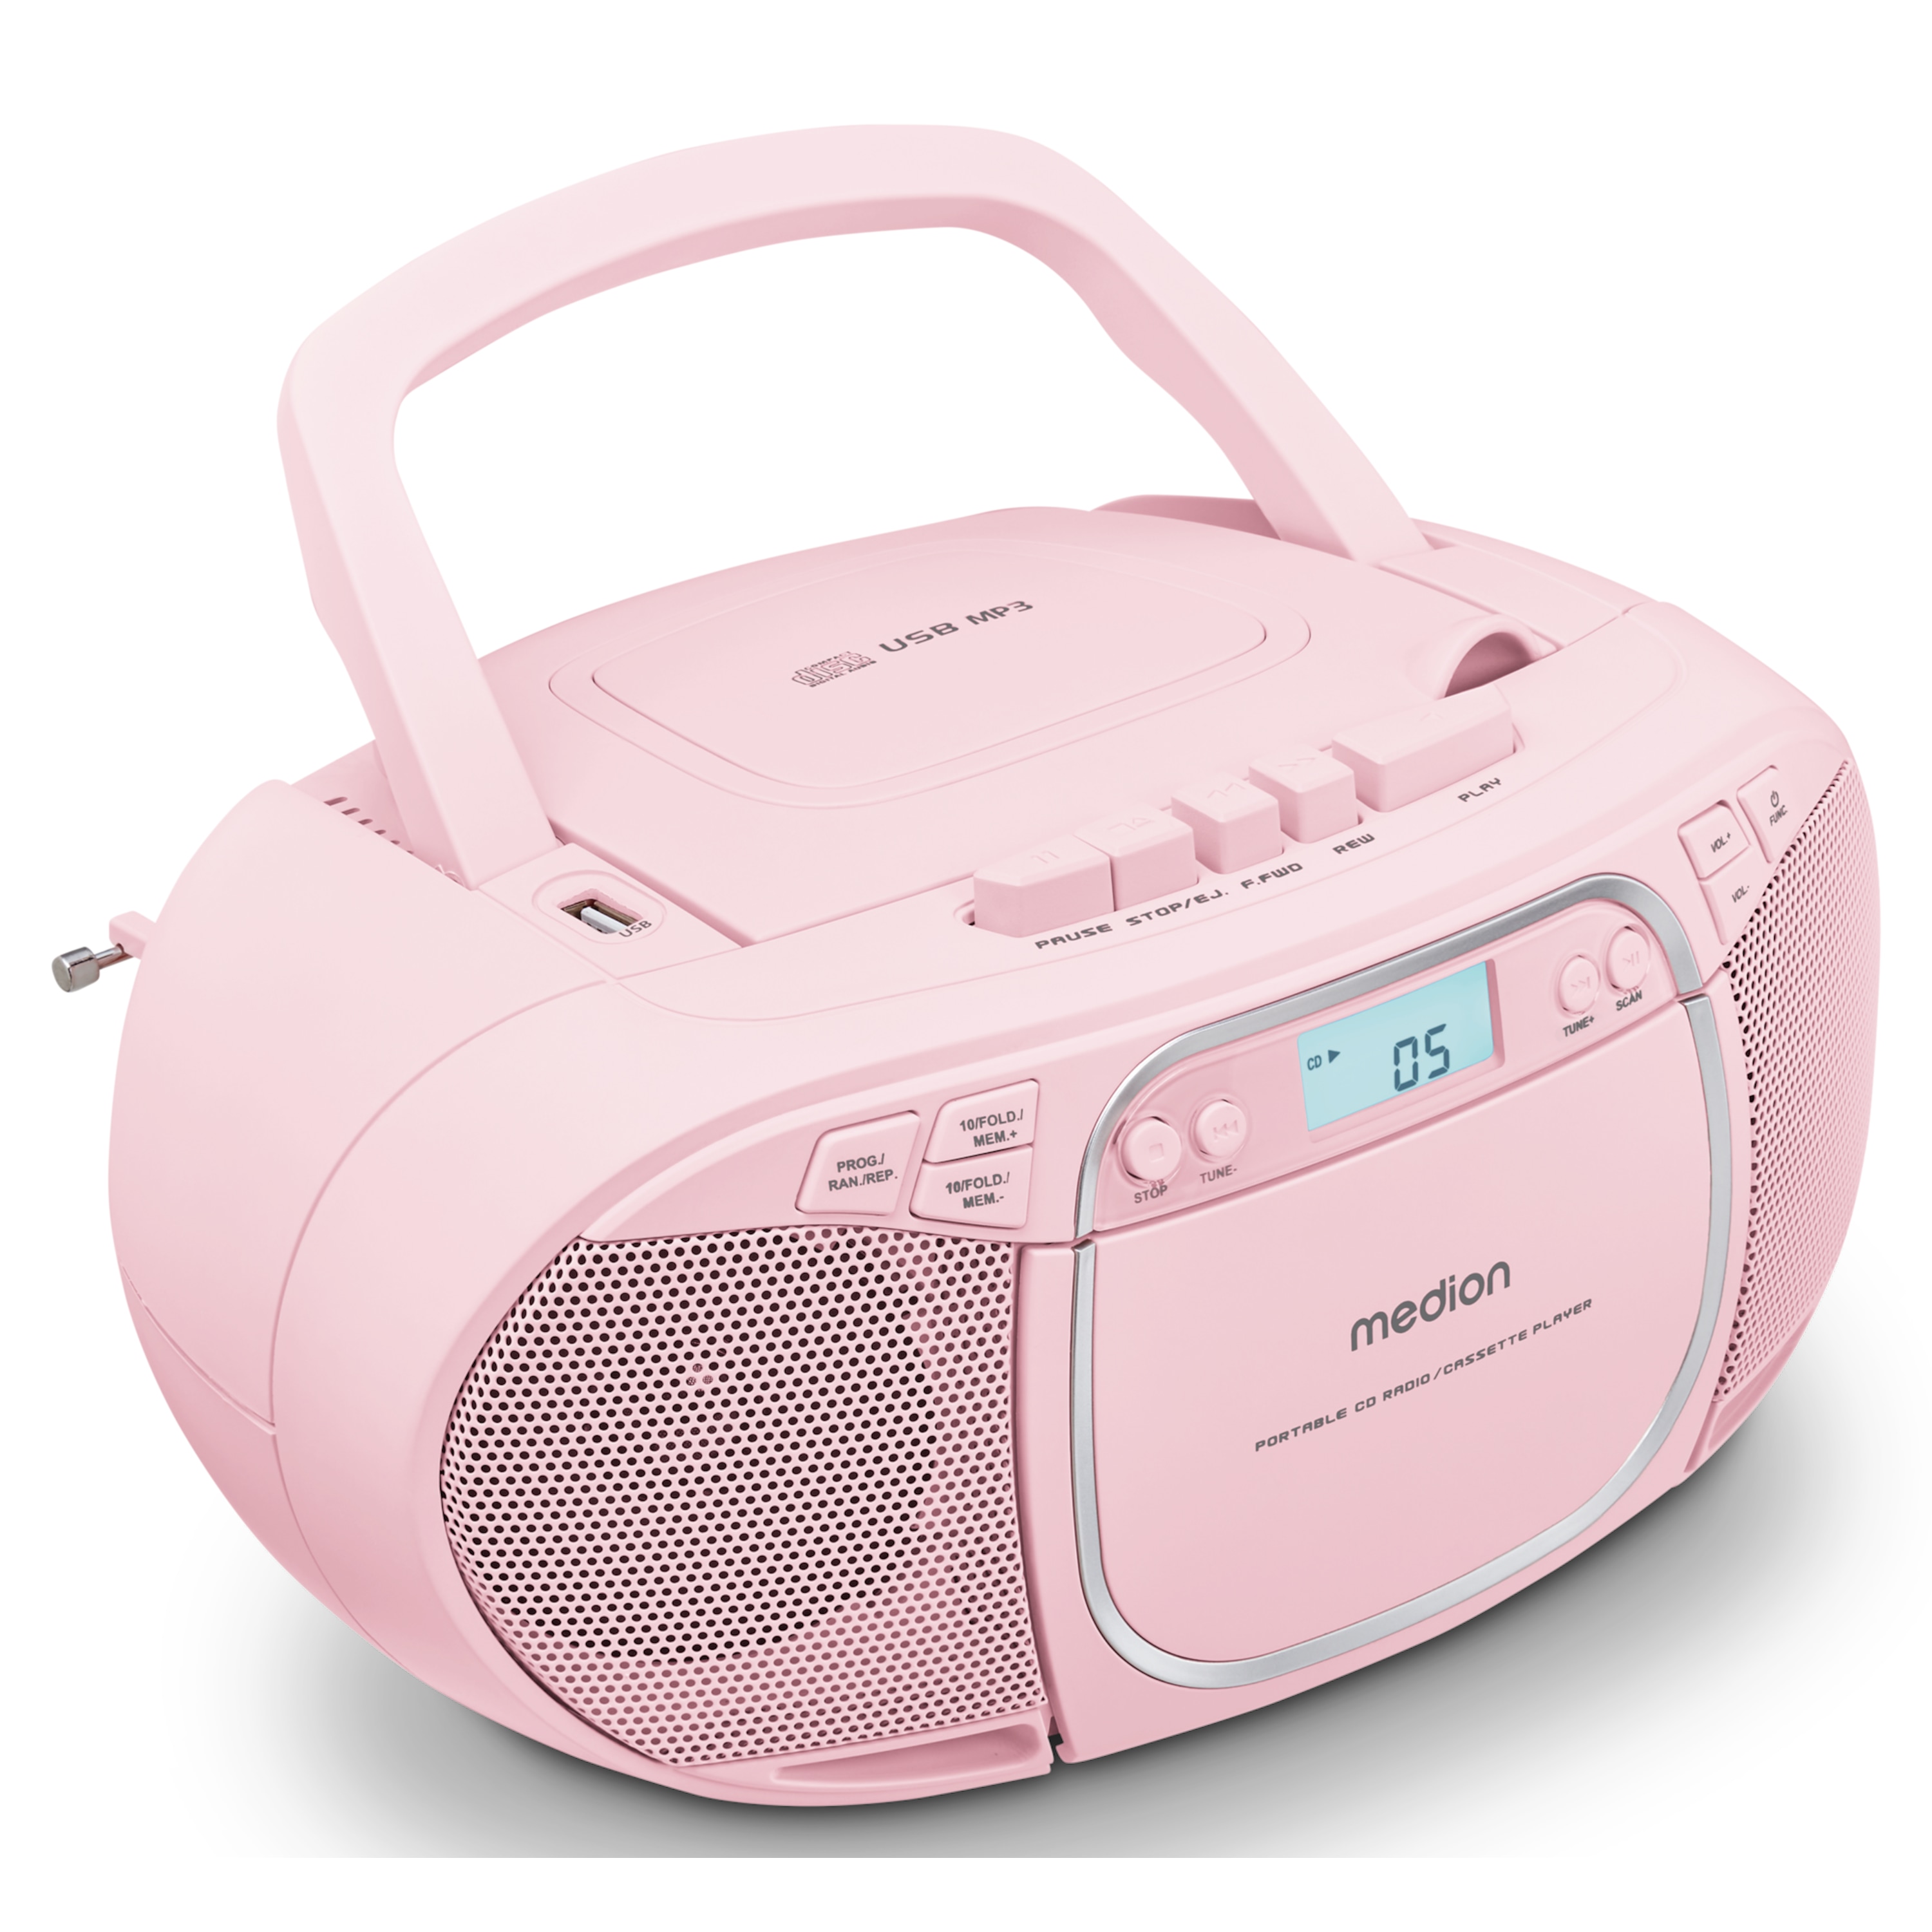 MEDION® LIFE® E66476 CD-/MP3-/Kassettenspieler rosa, LCD-Display mit Hintergrundbeleuchtung, PLL-UKW Stereo, Musikwiedergabe vom USB-Stick, 2 x 2 W RMS